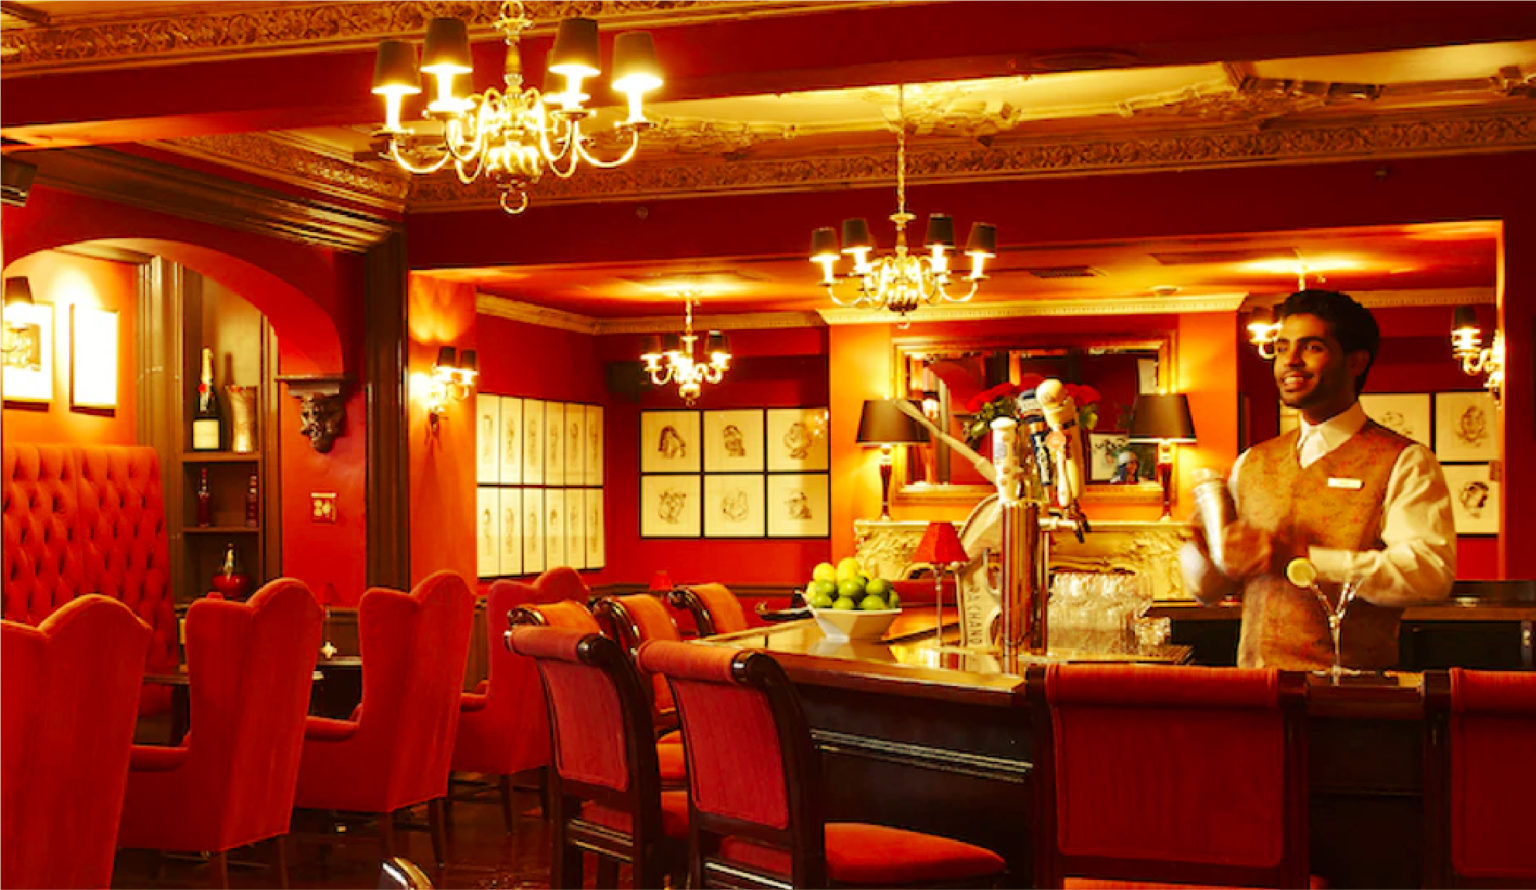 5 Historic Bars in DC You Don't Want To Miss! Drink In The History of DC...